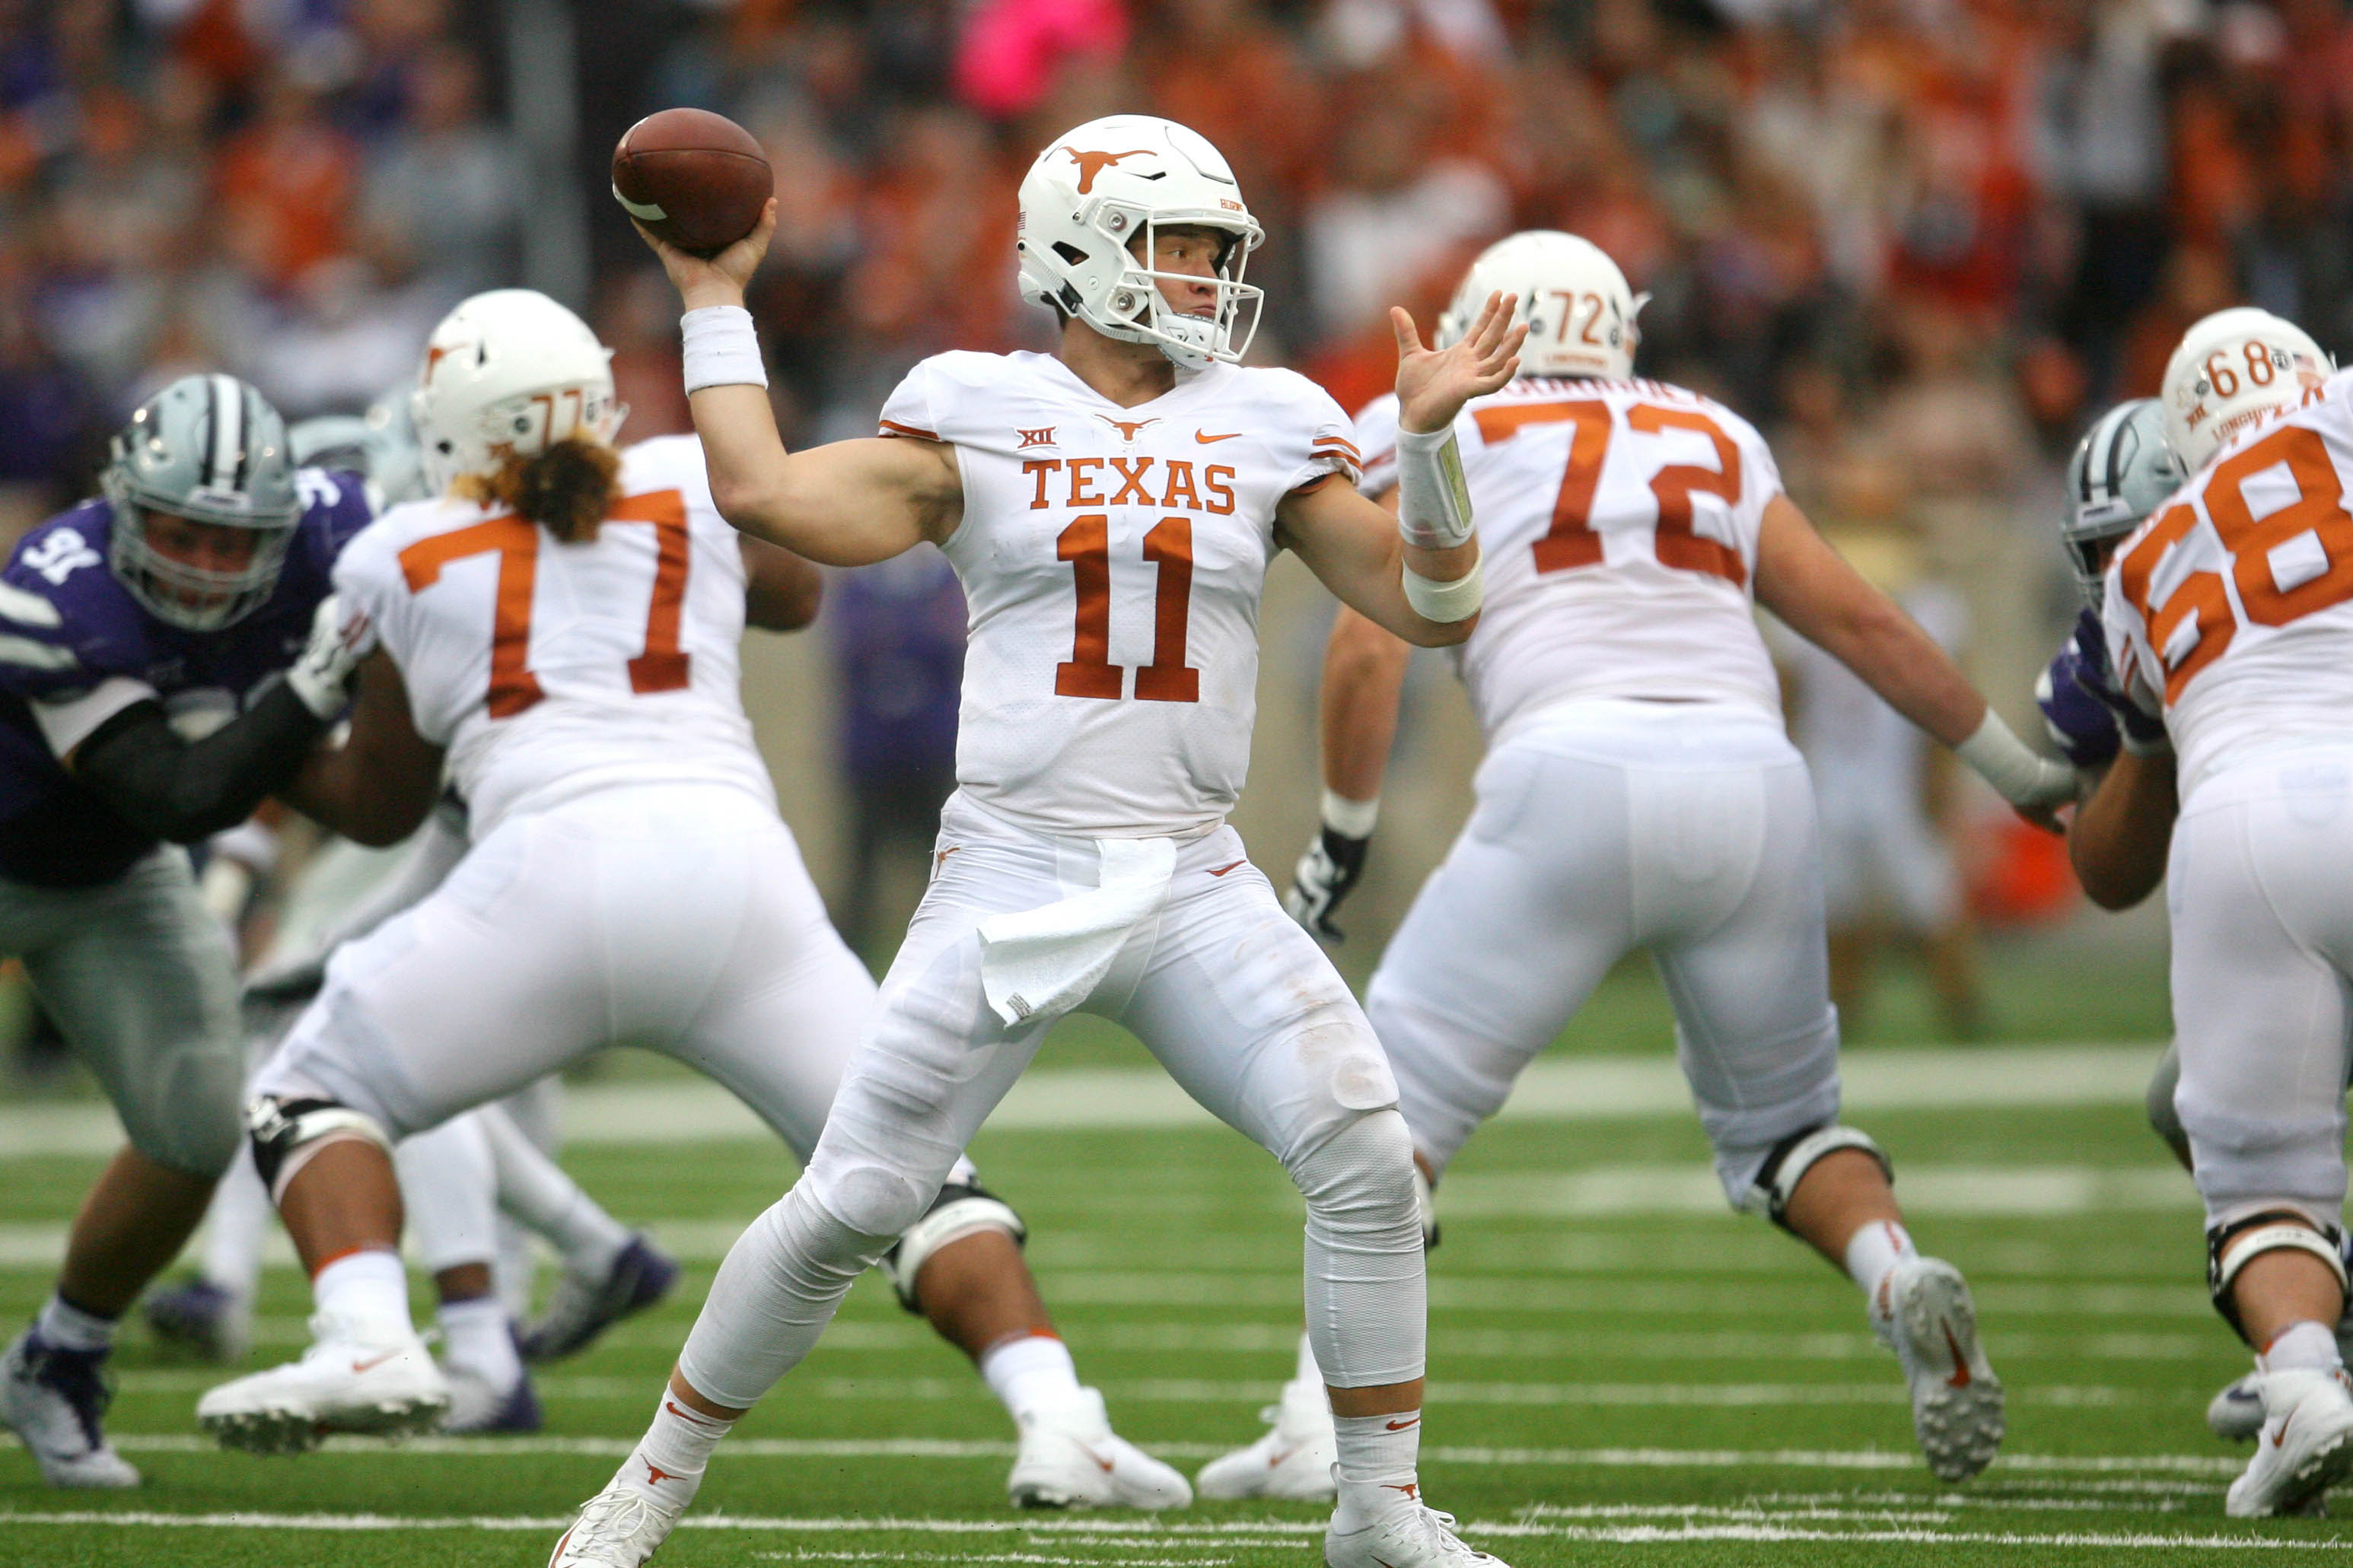 PHOTOS: Sam Ehlinger leads Texas to 4th straight win as Longhorns top Kansas State 19-14 in Manhattan